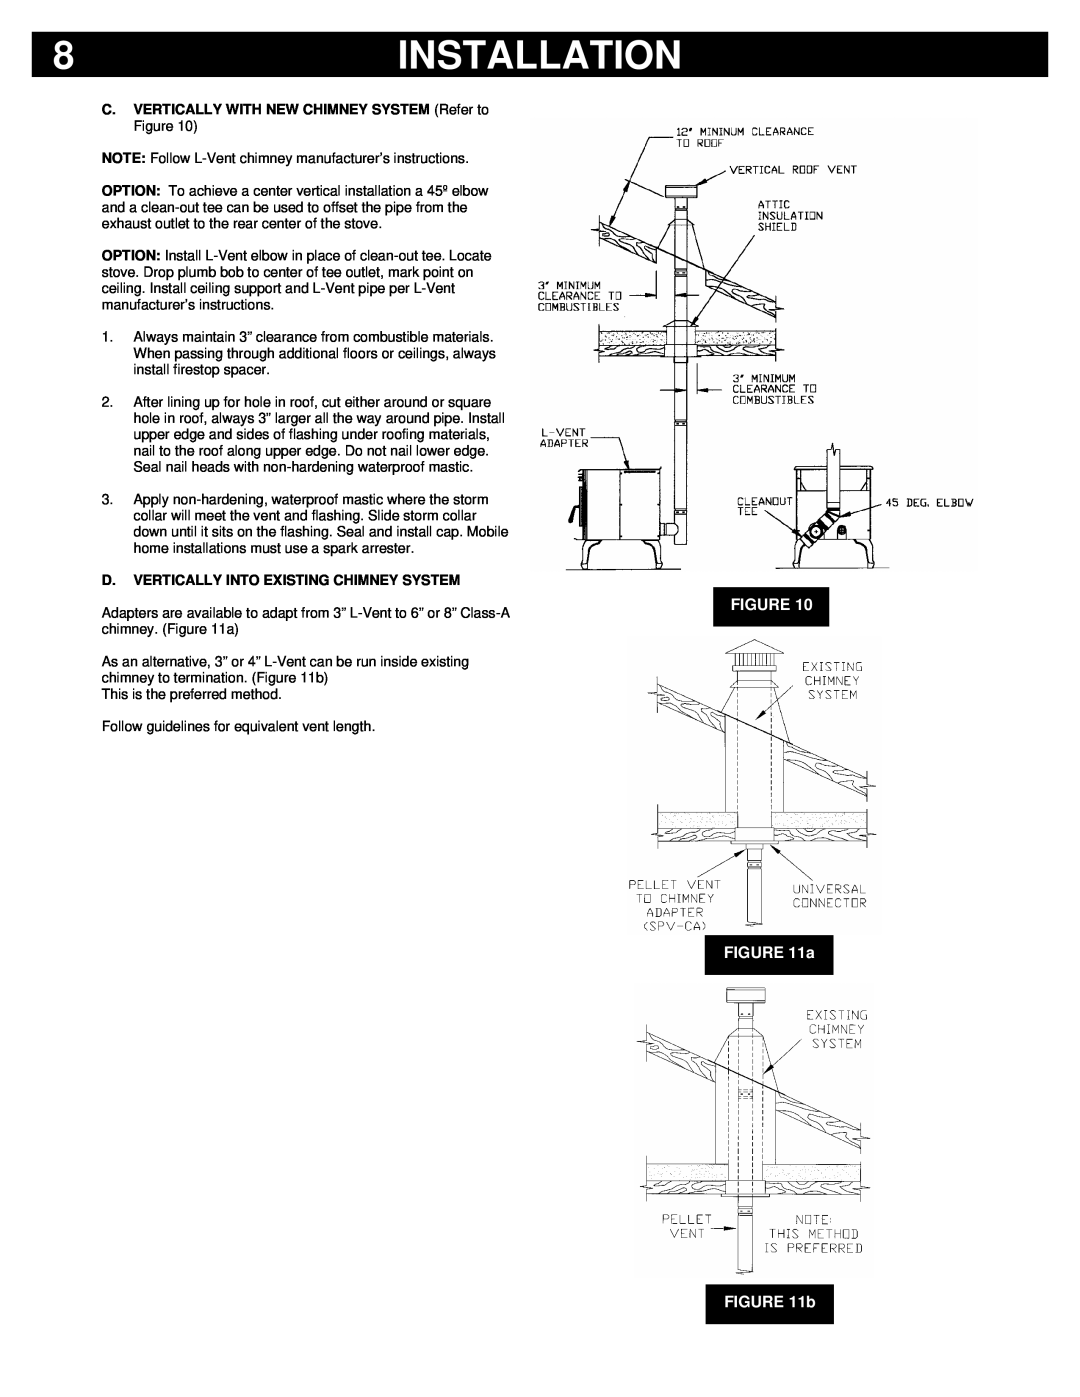 Breckwell P22FSA, P22FSL, P22I owner manual Installation, FIGURE a b, D.Vertically Into Existing Chimney System 